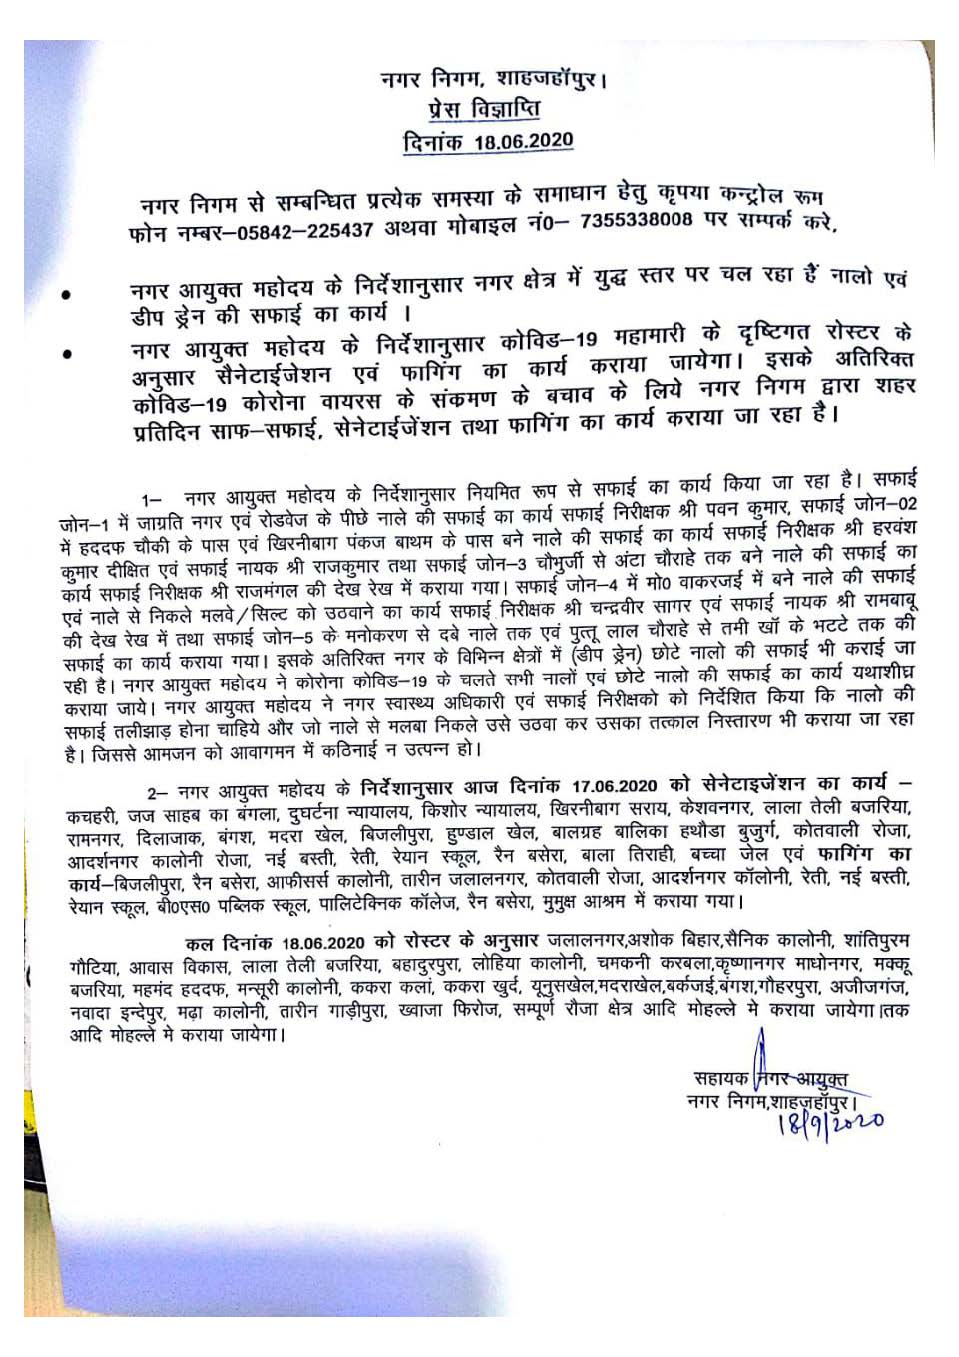 Regarding press release against the war level cleanliness works and sanitization done on 18.06.2020 in various cleanliness zones of the city as per City Commissioner’s guidelines.